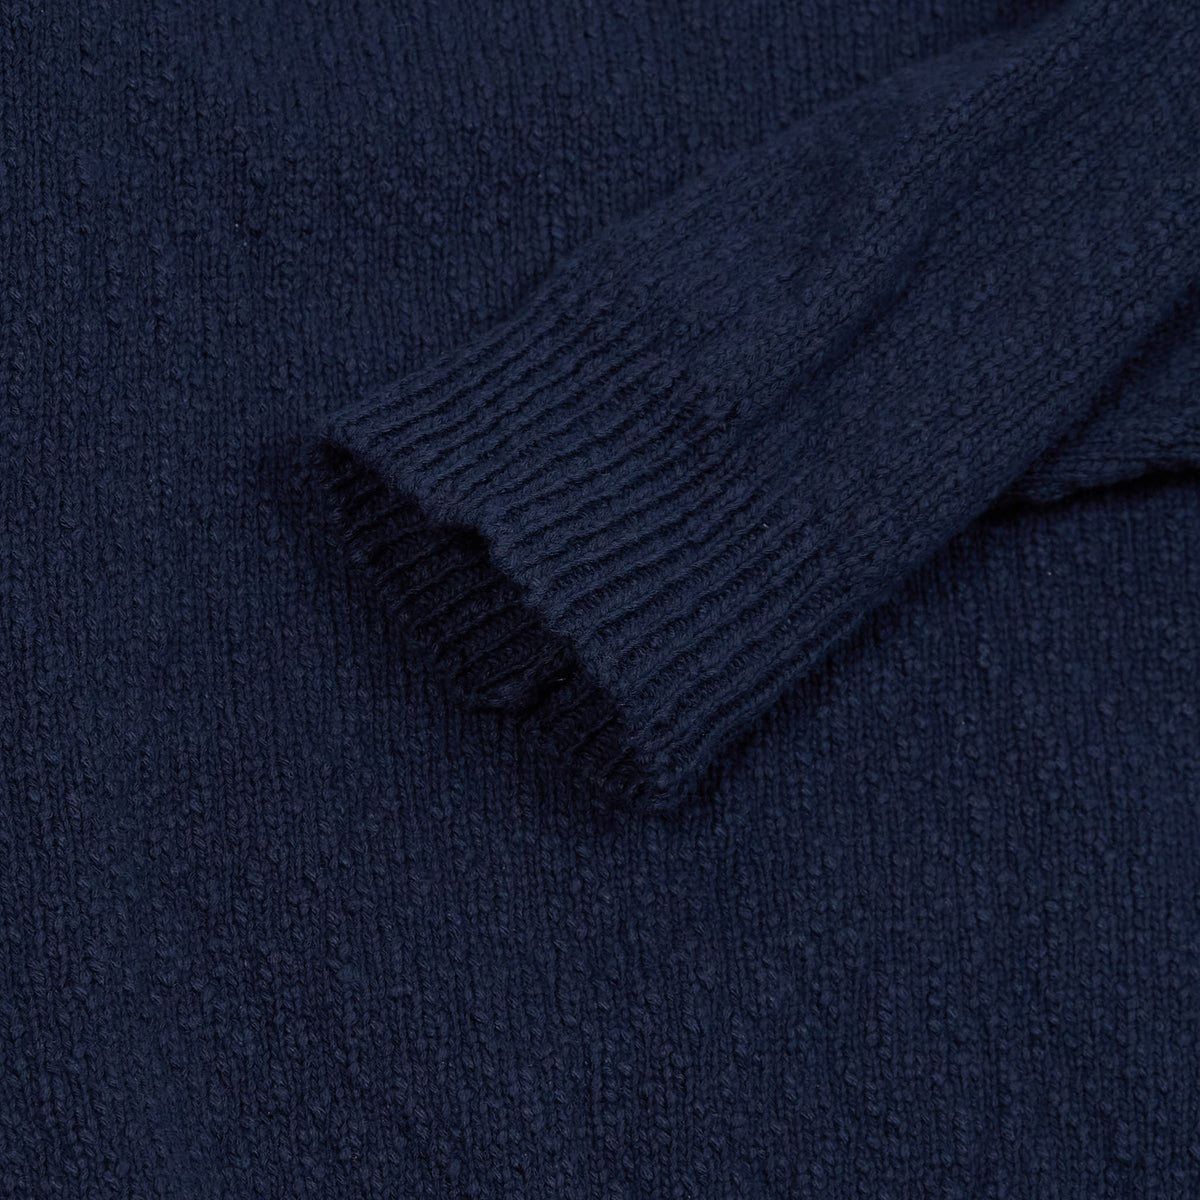 Stone Island Knitted Cotton Linen Pullover